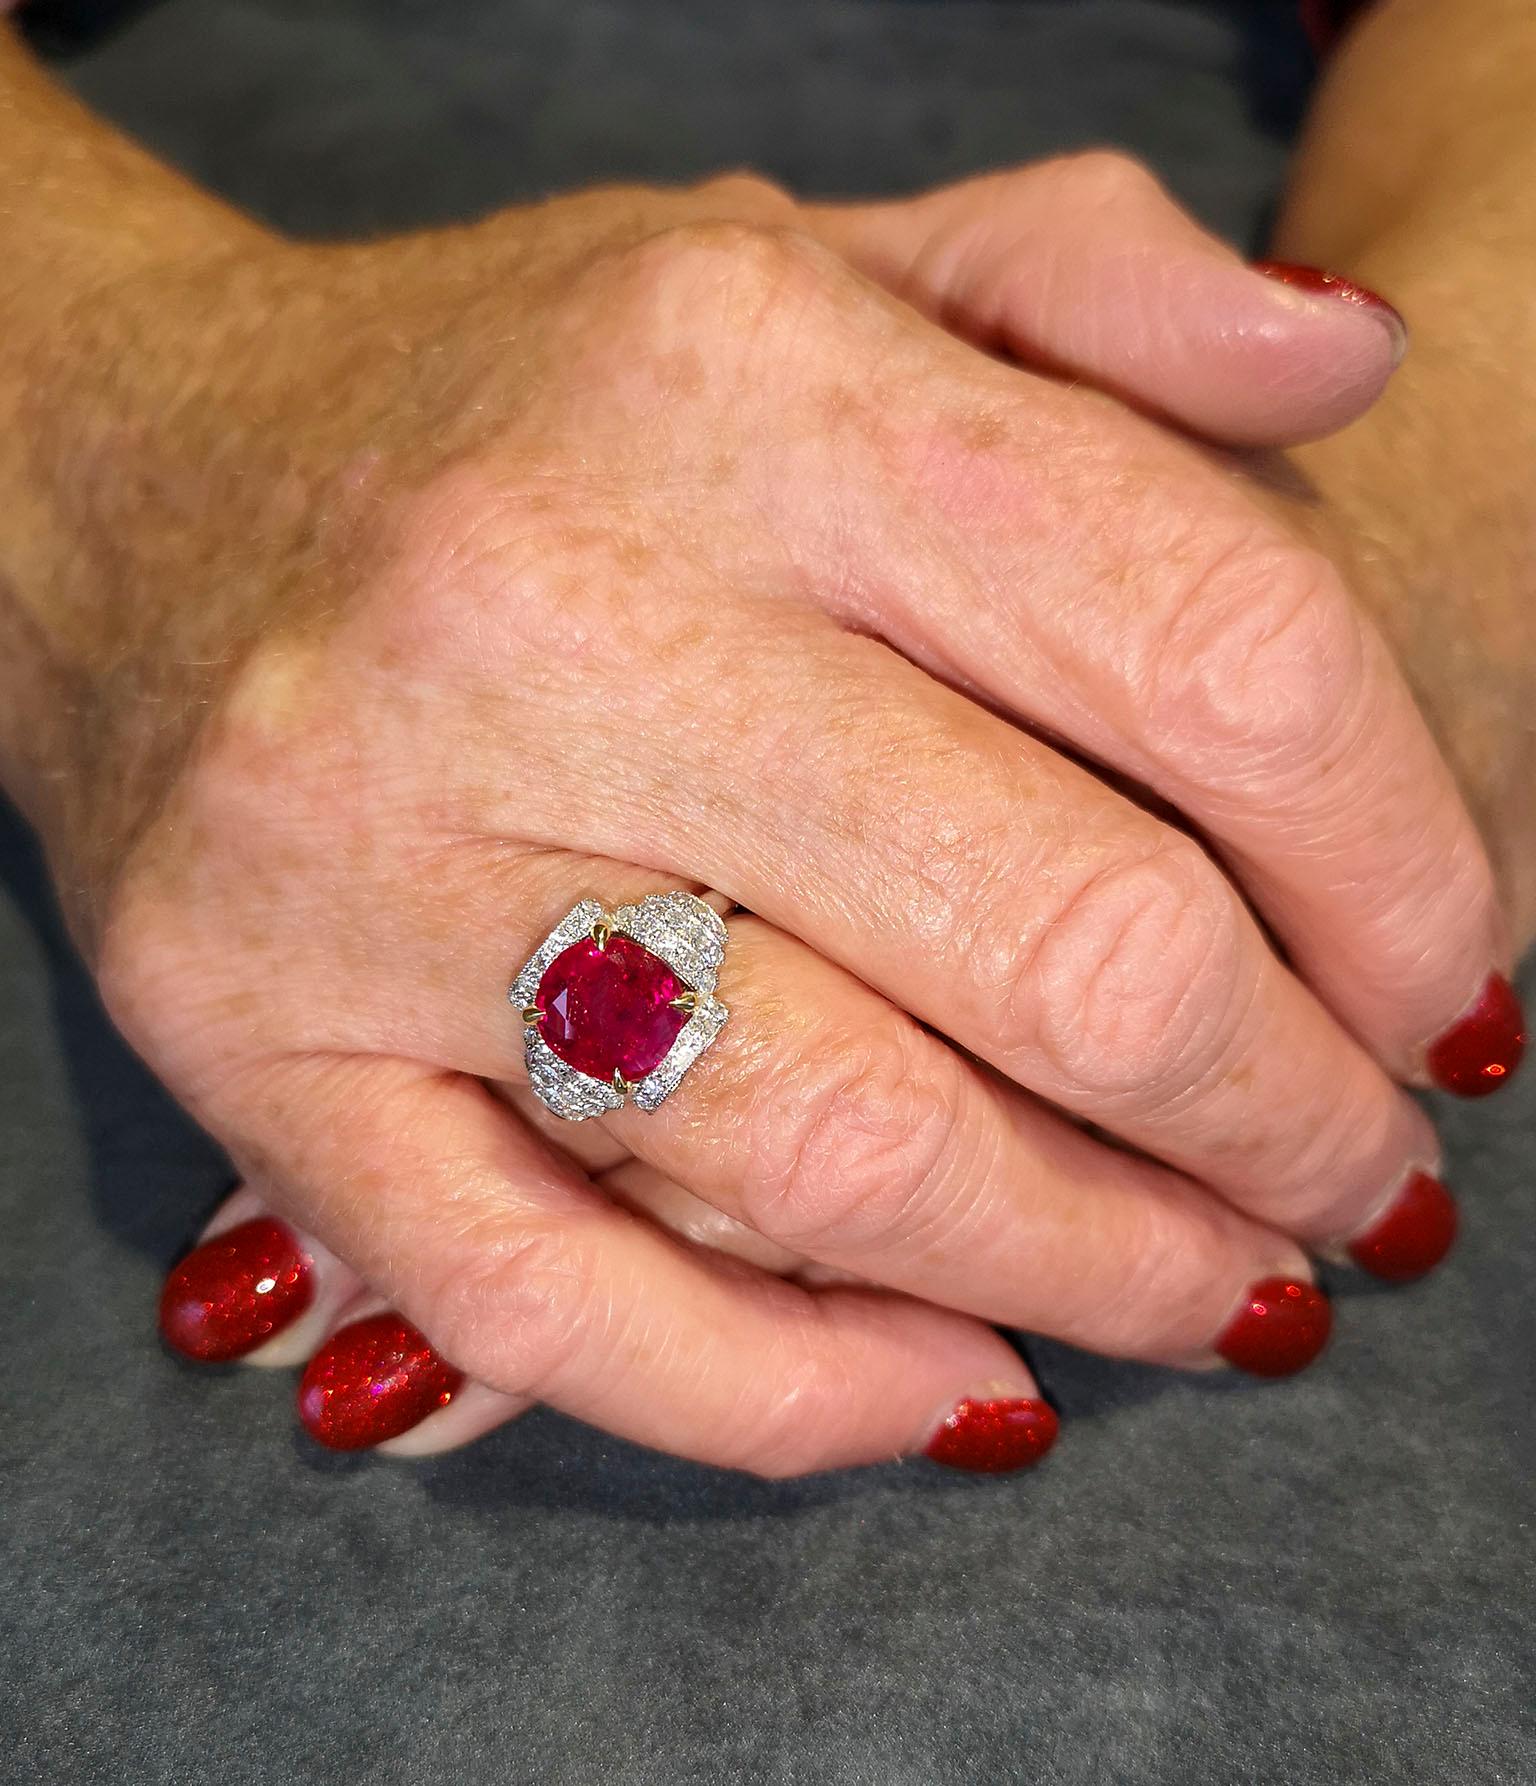  An exquisite, finest gem quality ruby and diamond Art Deco cocktail ring. Featuring a cushion-cut central ruby of the most magnificent blood-red colour, mounted in four claws, flanked on each side by tiered steps of pavé diamonds, leading to a